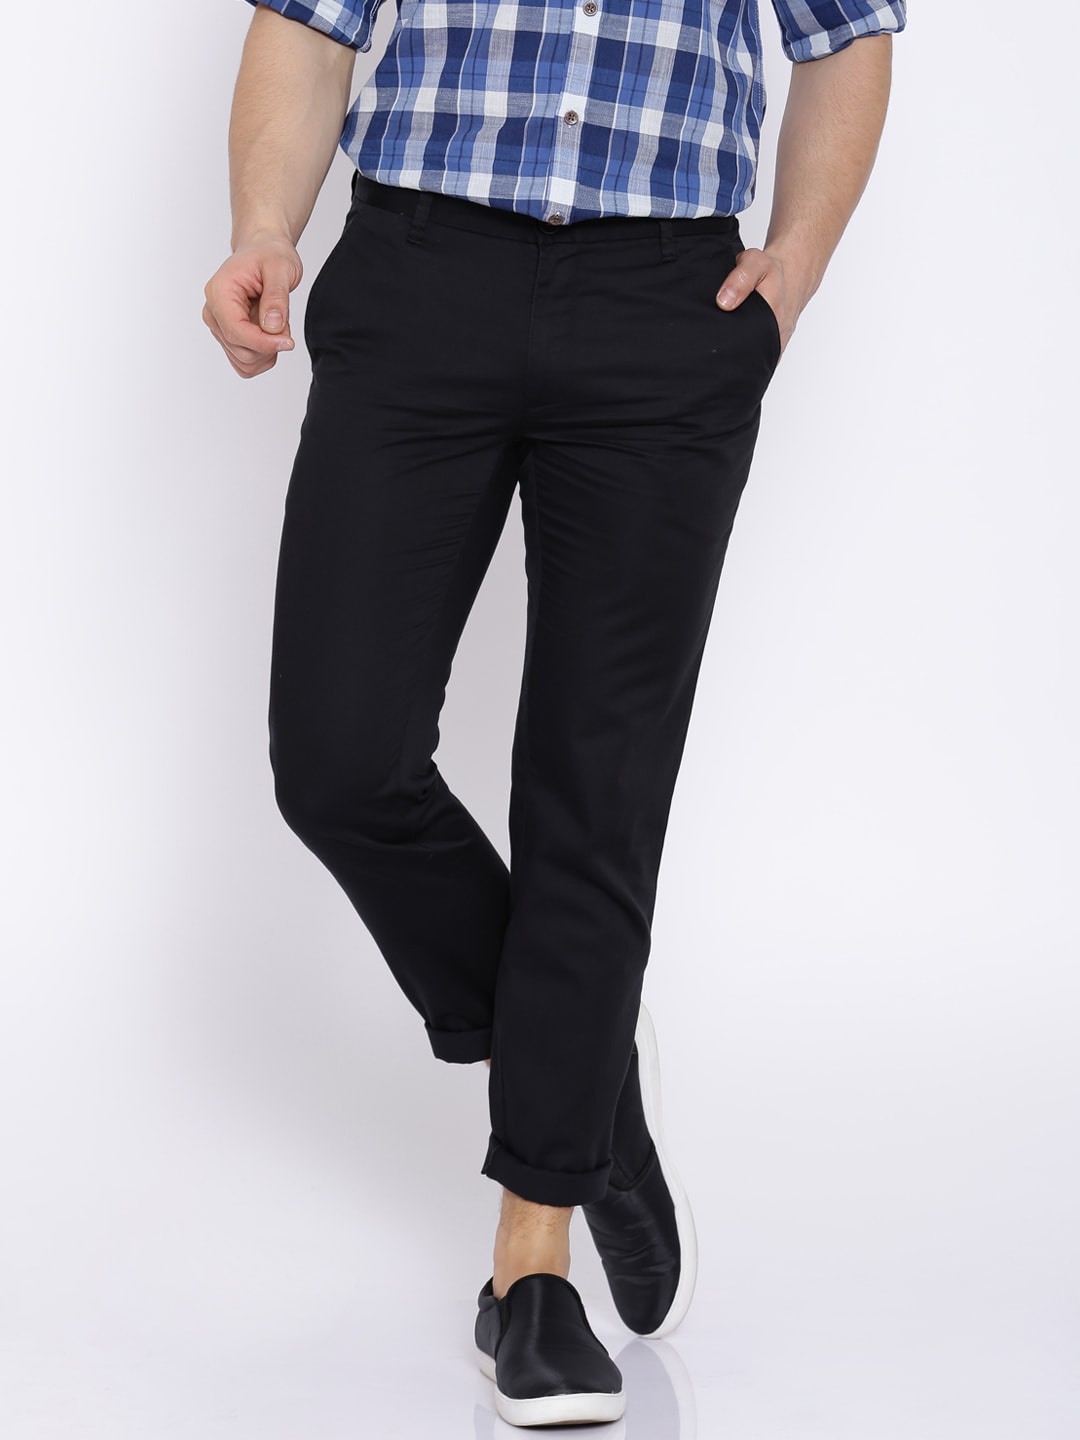 Buy Navy Blue Trousers  Pants for Men by Wills Lifestyle Online  Ajiocom